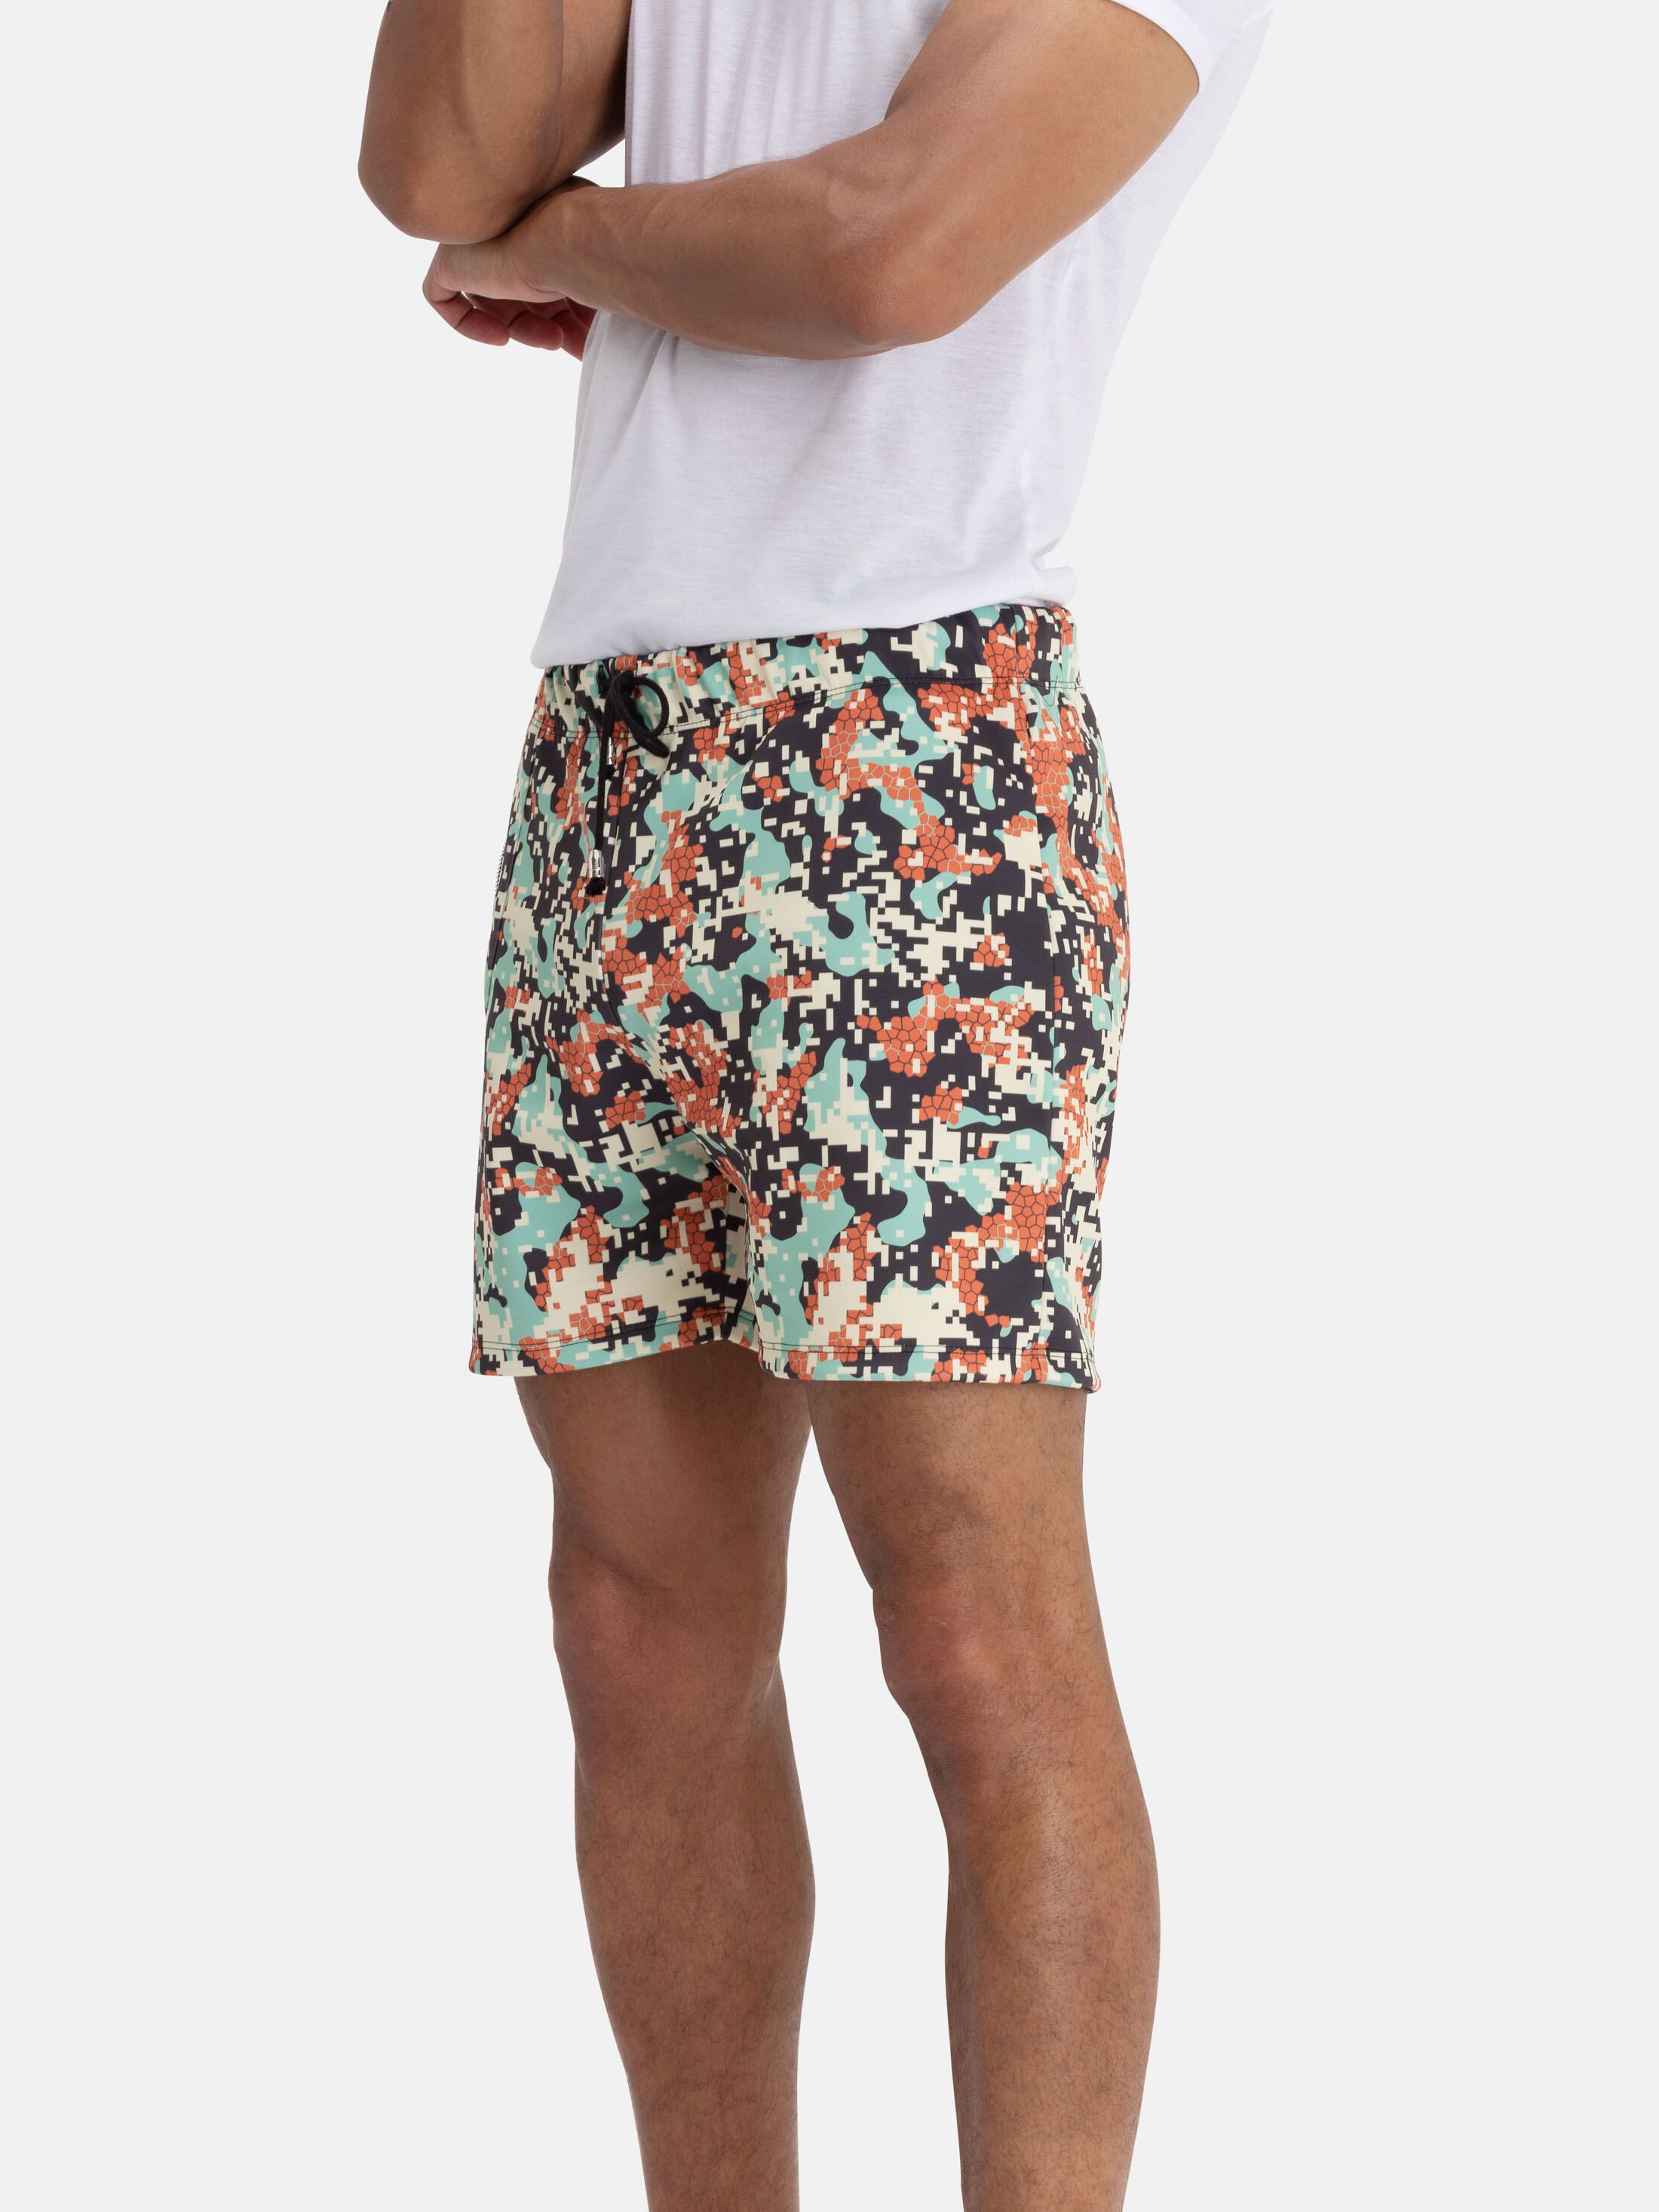 Design Your Own Gym Shorts